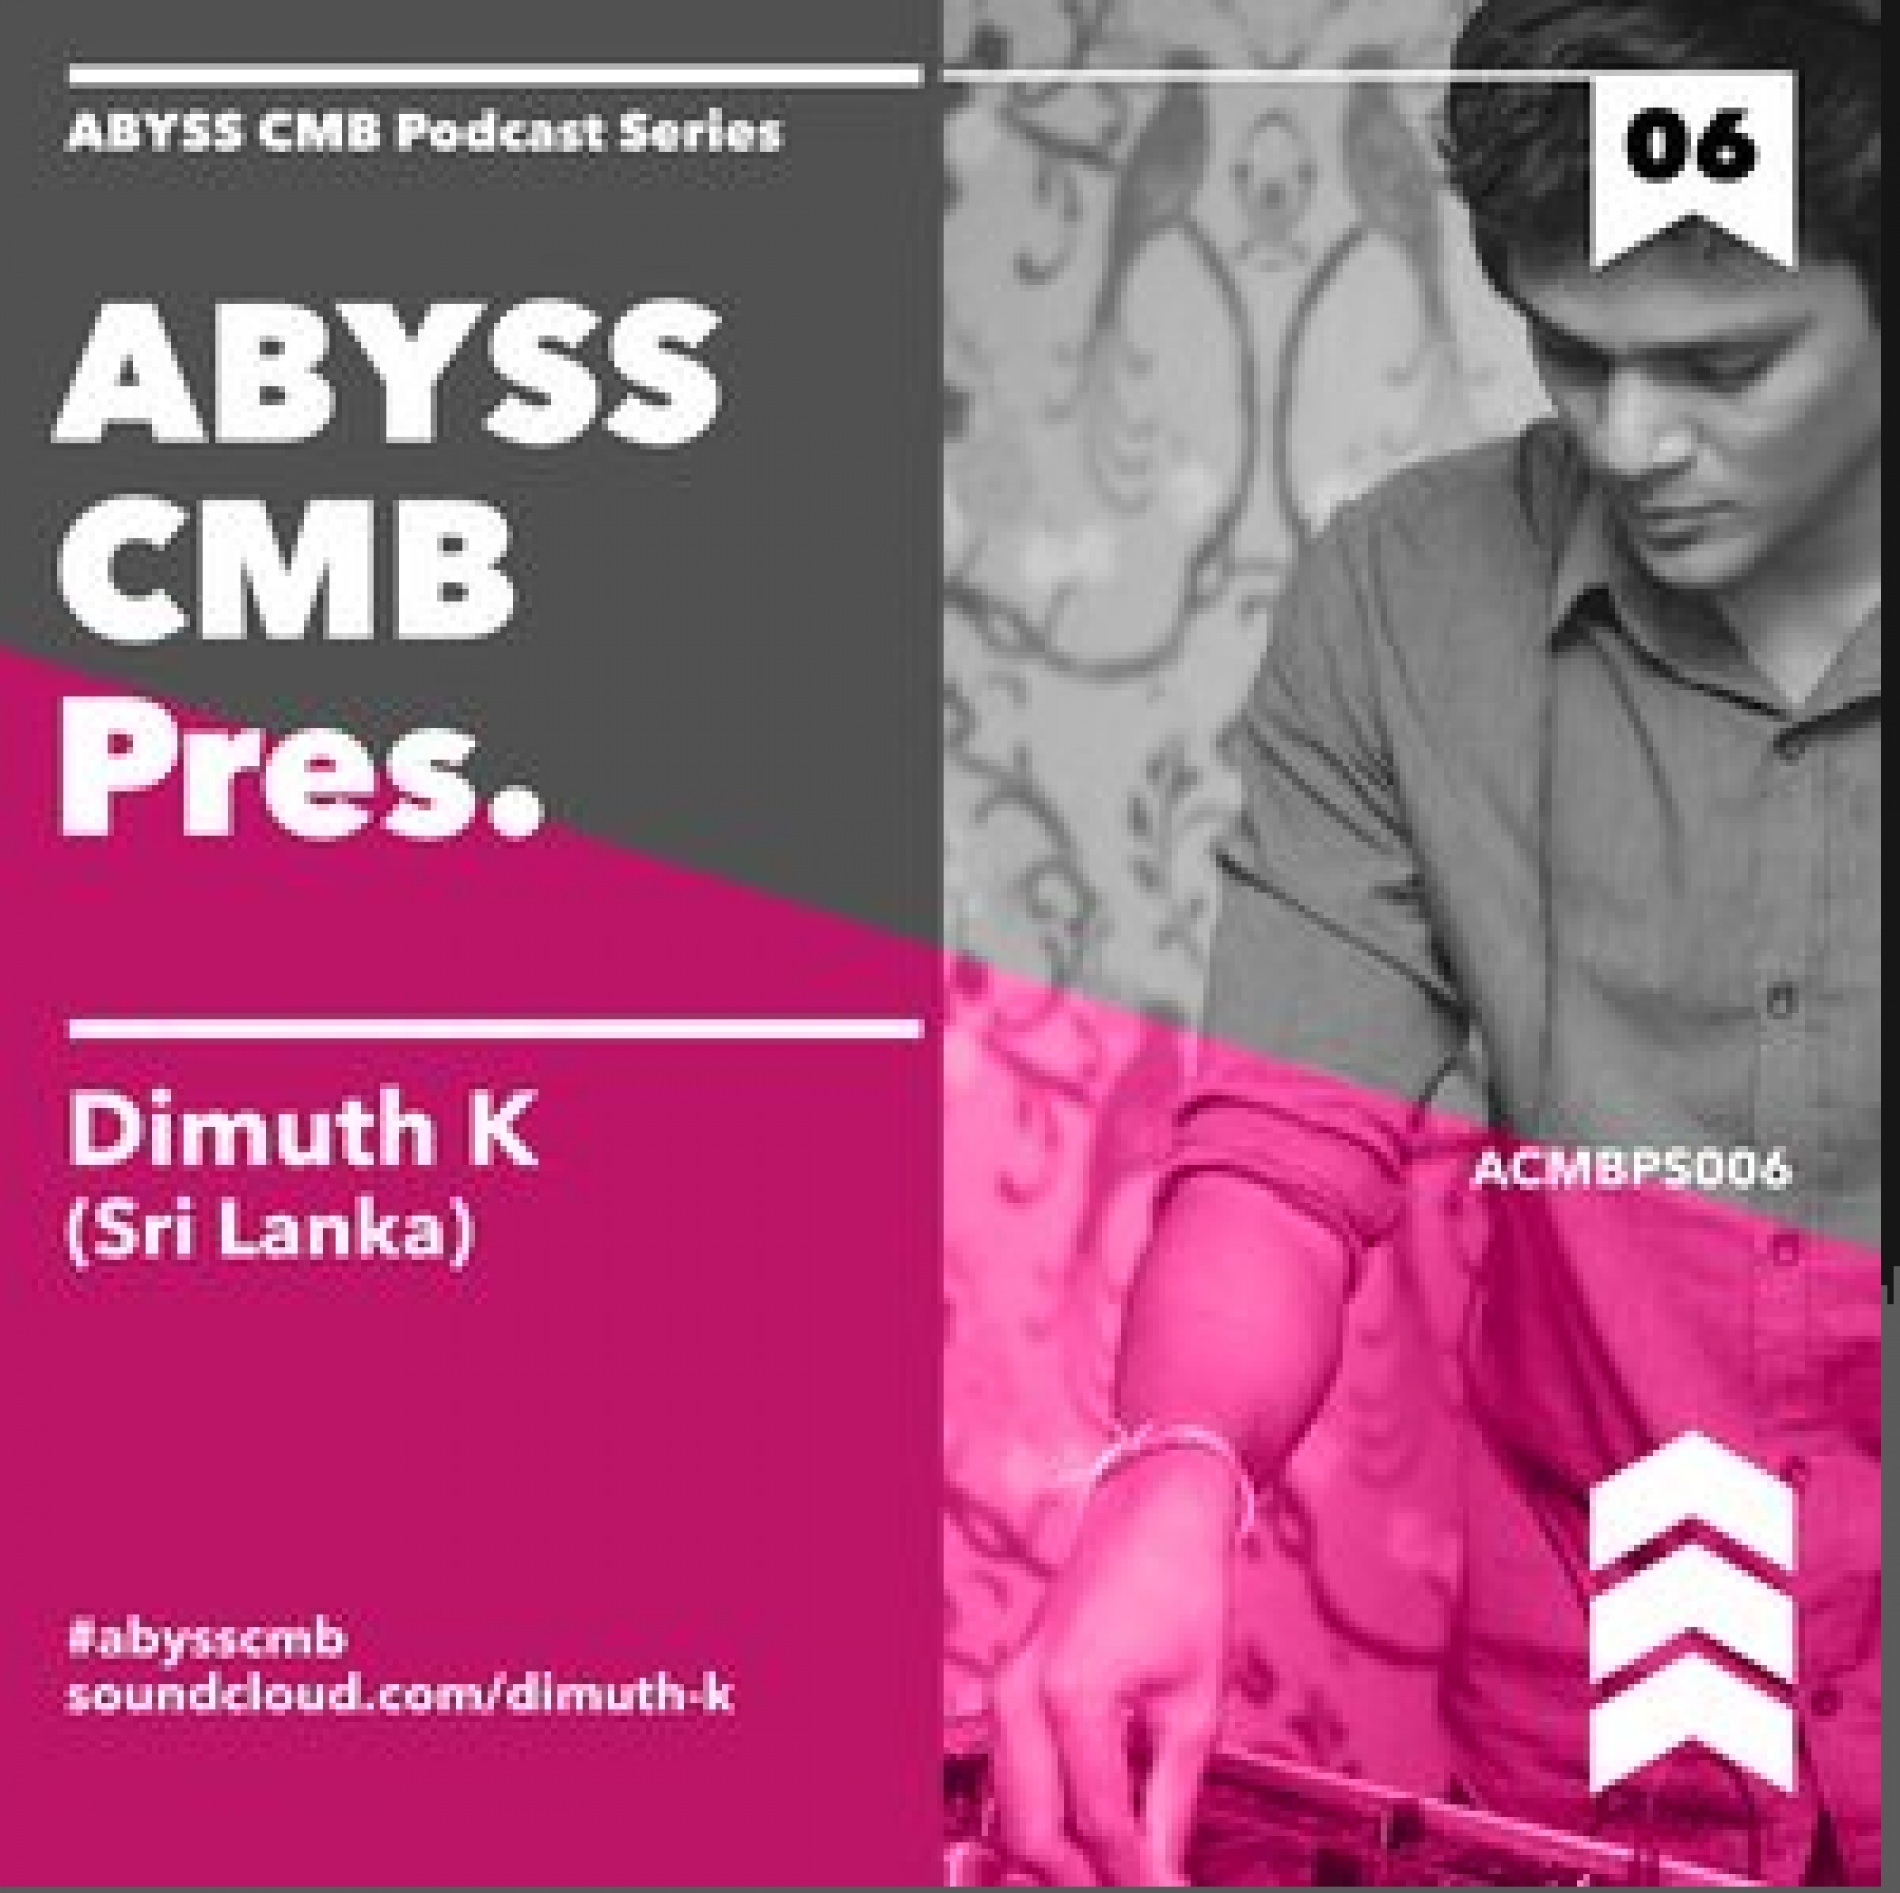 Abyss Colombo Presents: Dimuth K